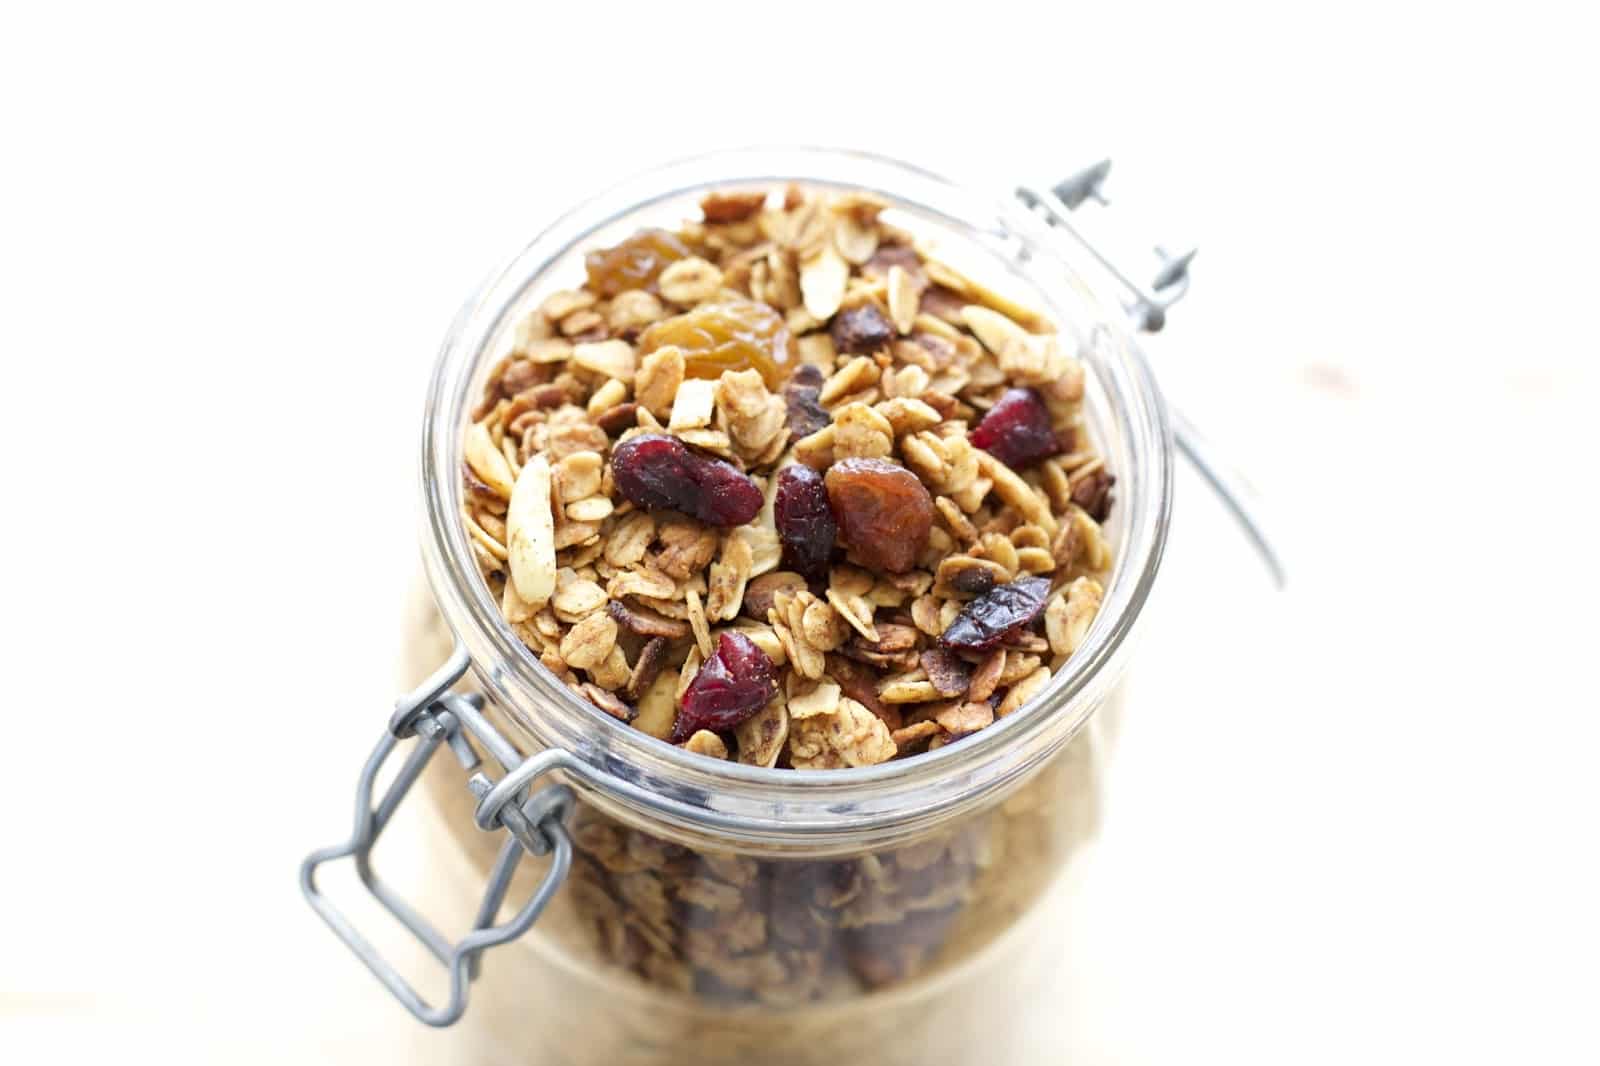 How To Make Granola In The Crock-Pot